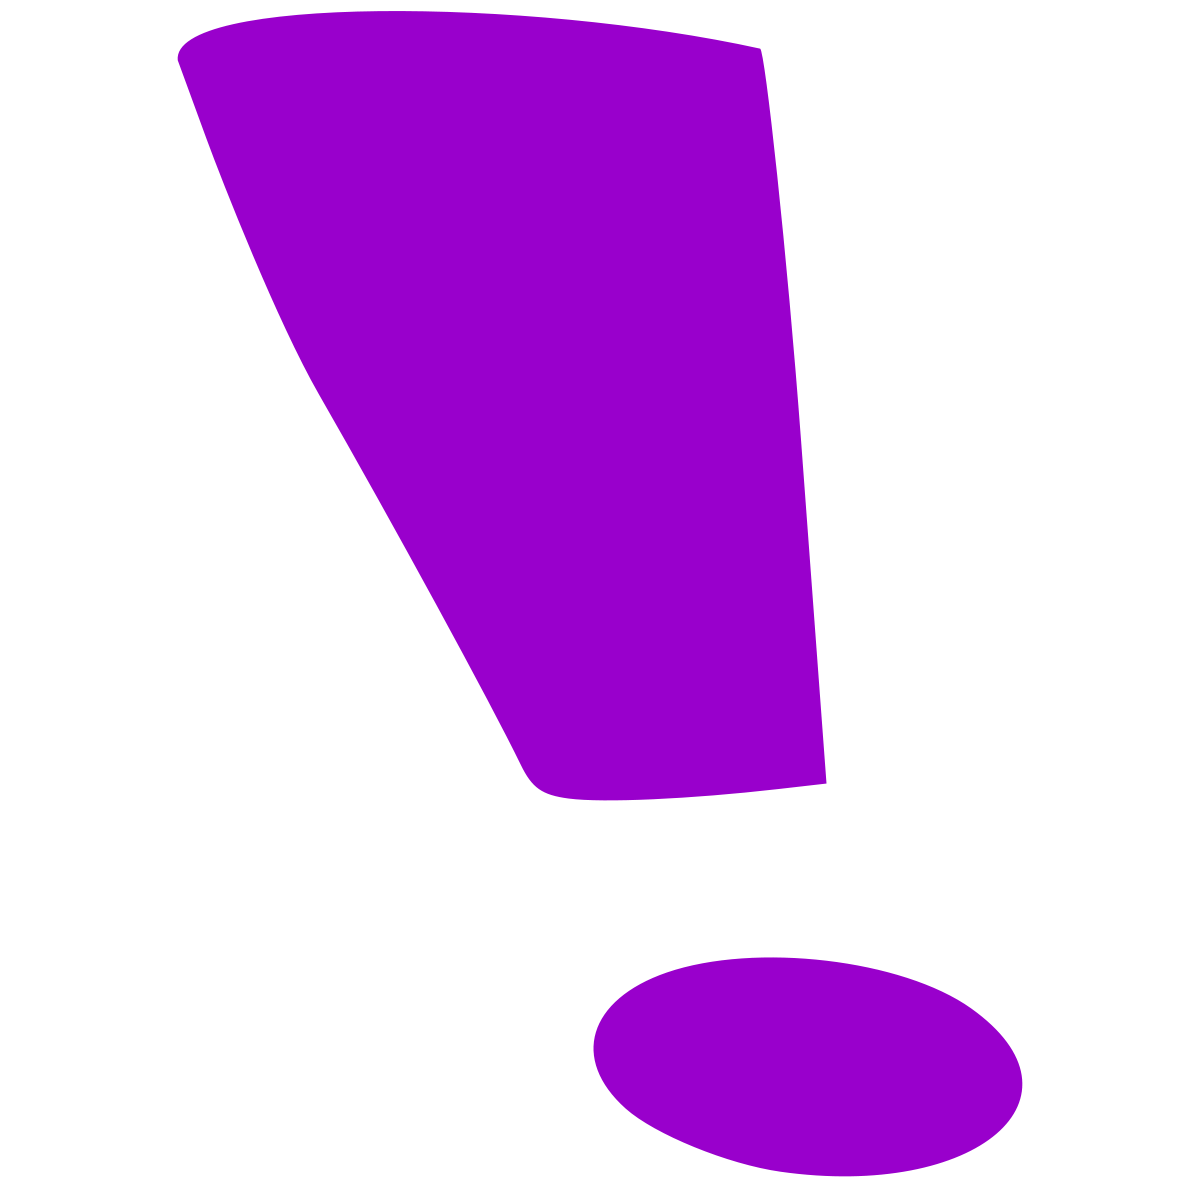 Exclamation mark PNG HD Images